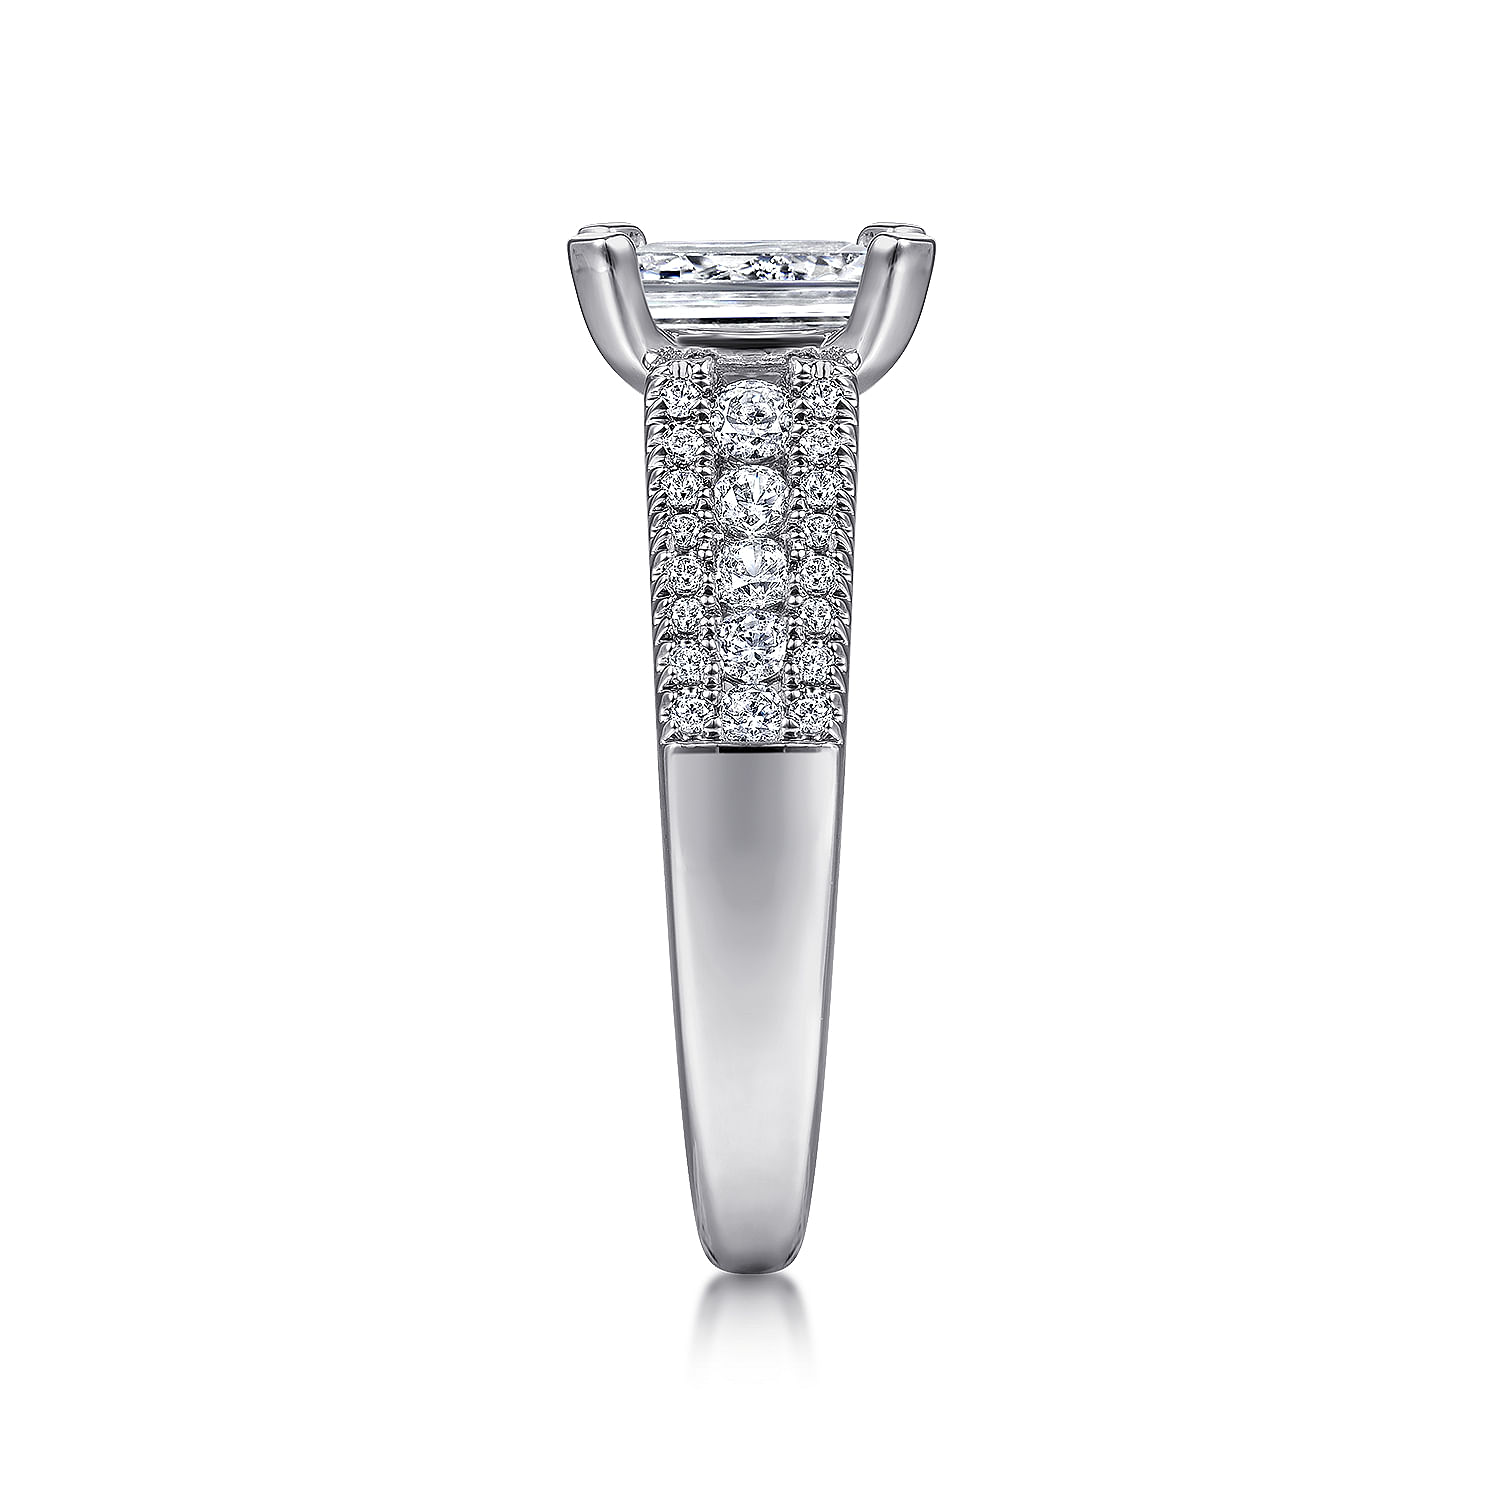 14K White Gold Wide Band Emerald Cut Diamond Engagement Ring